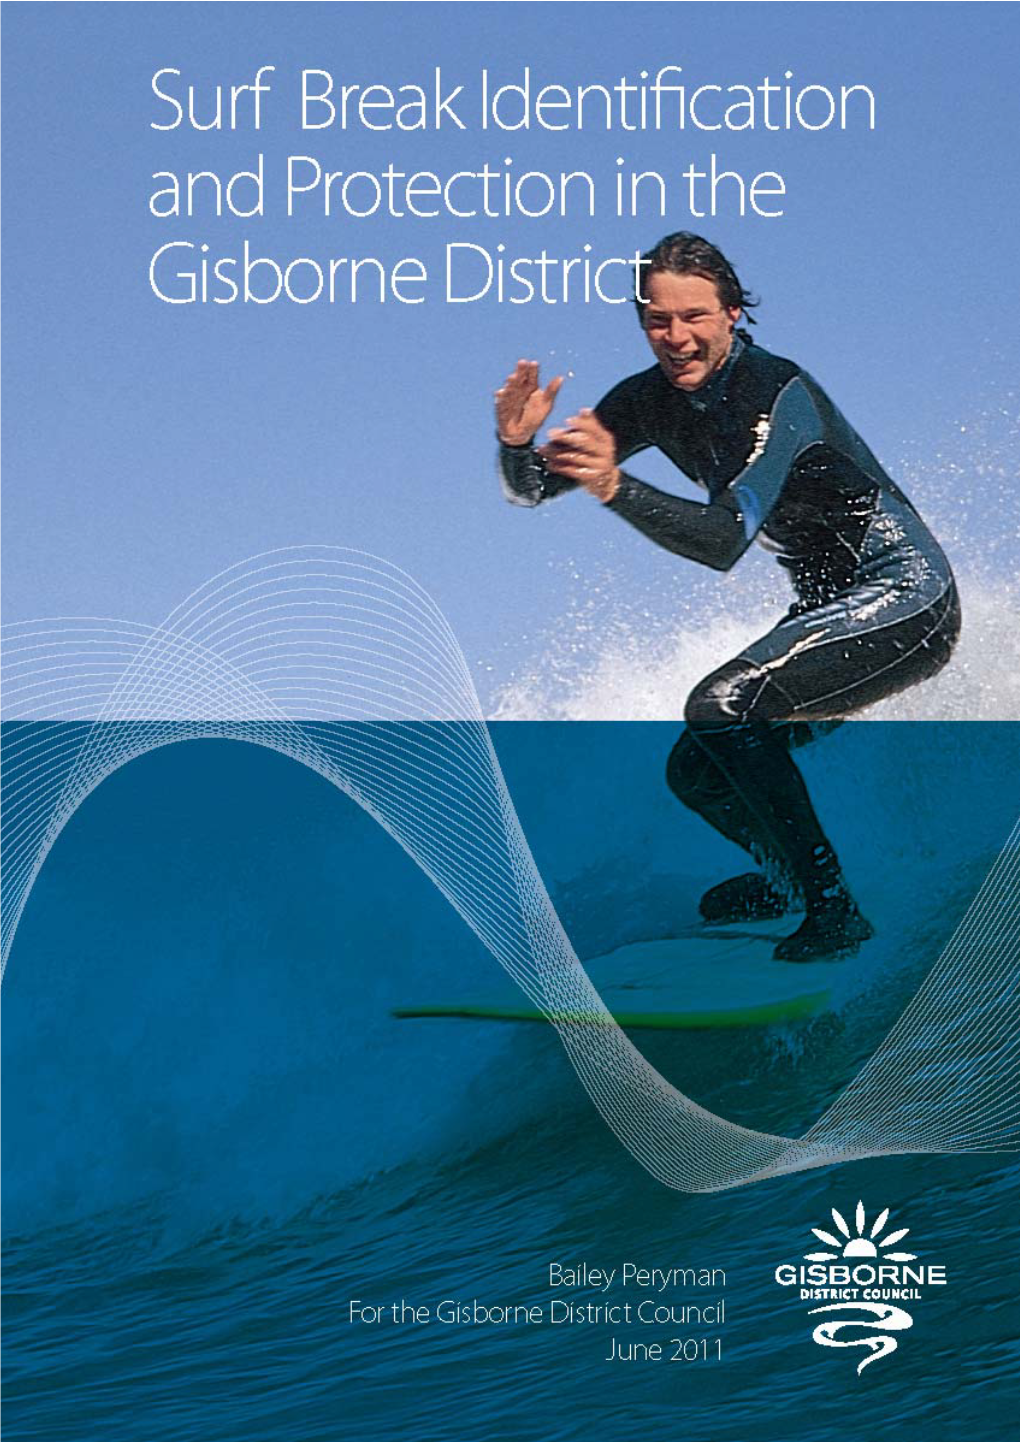 N-206088 Surf Break Identification and Protection in the Gisborne District